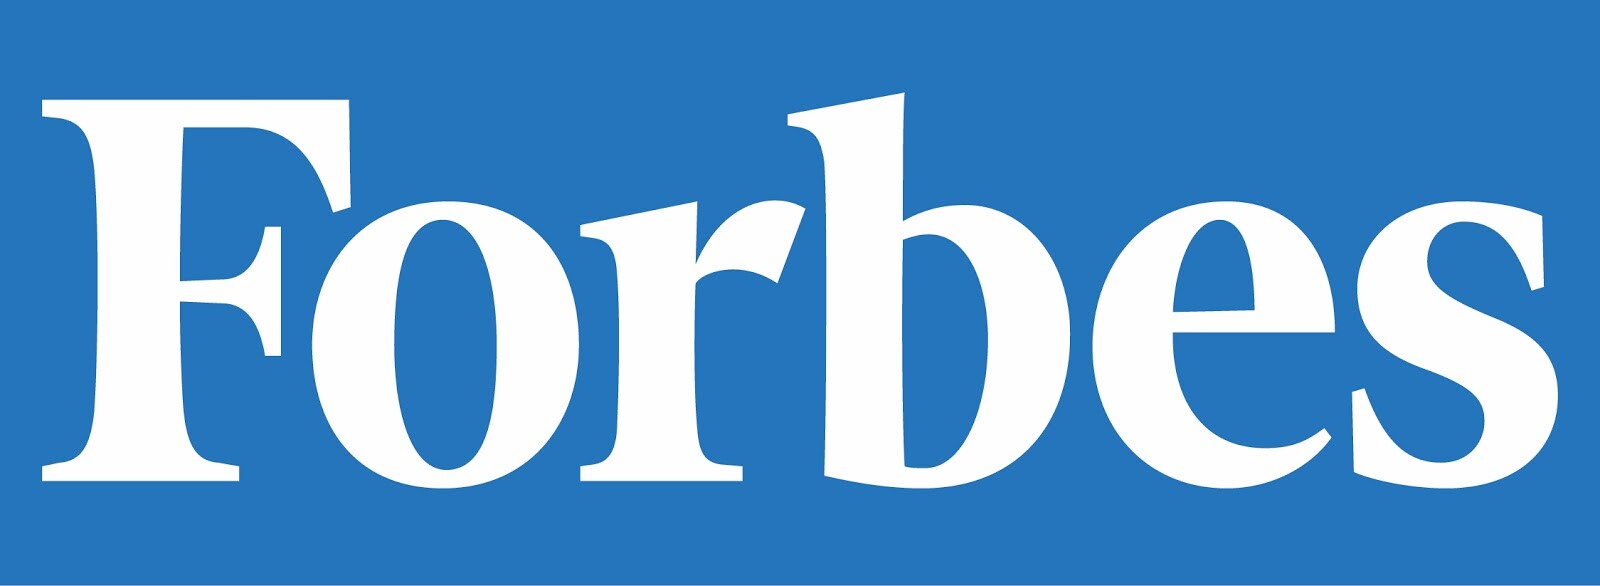 forbes-logo-small